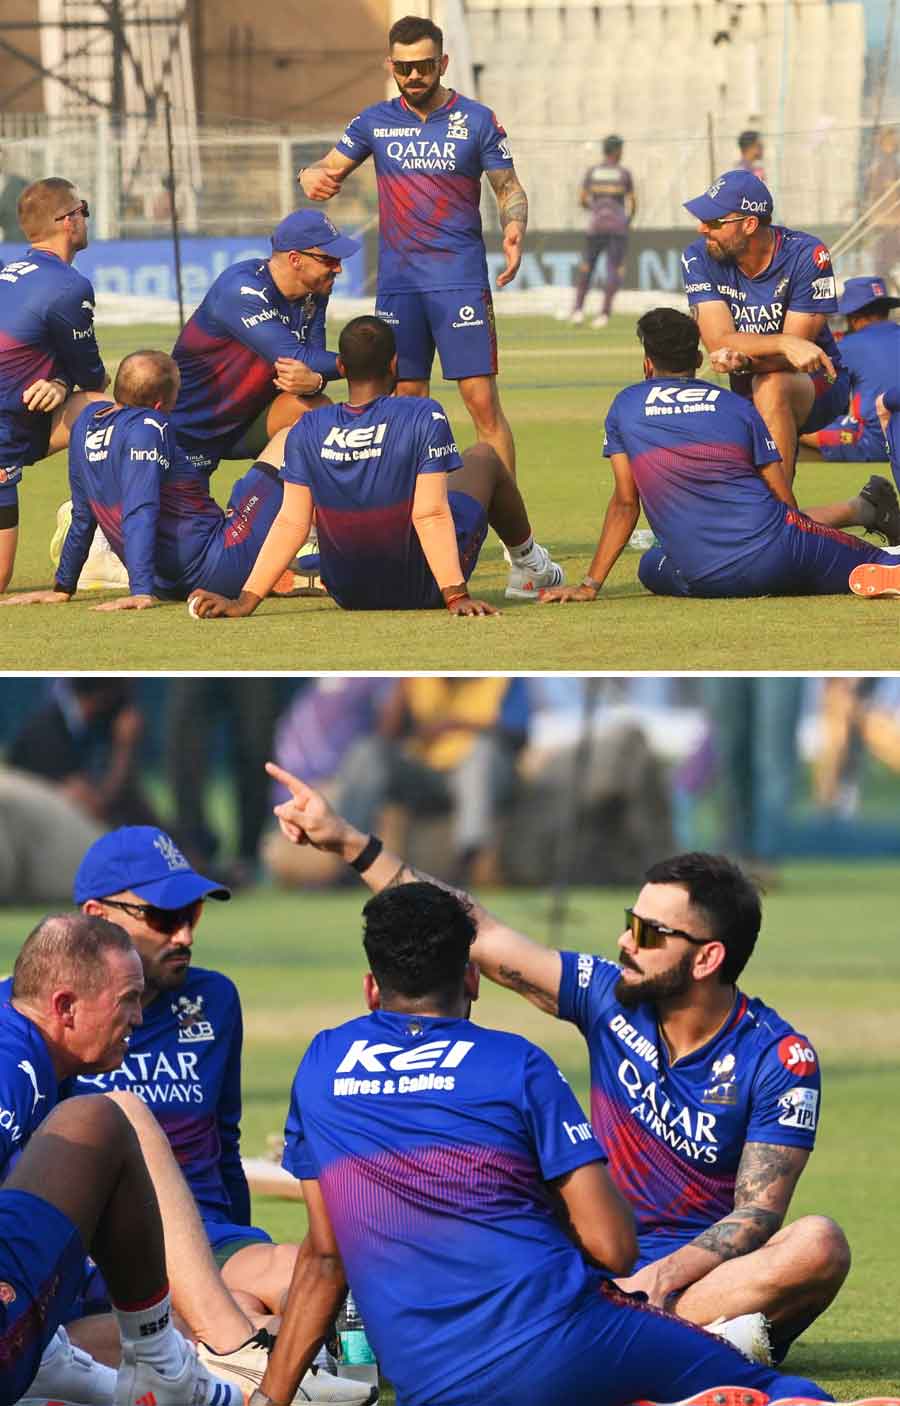 Skipper no more but still leading from the front, Kohli has a few tips to share with his teammates and they would do well to learn a lesson or two and pick up their game